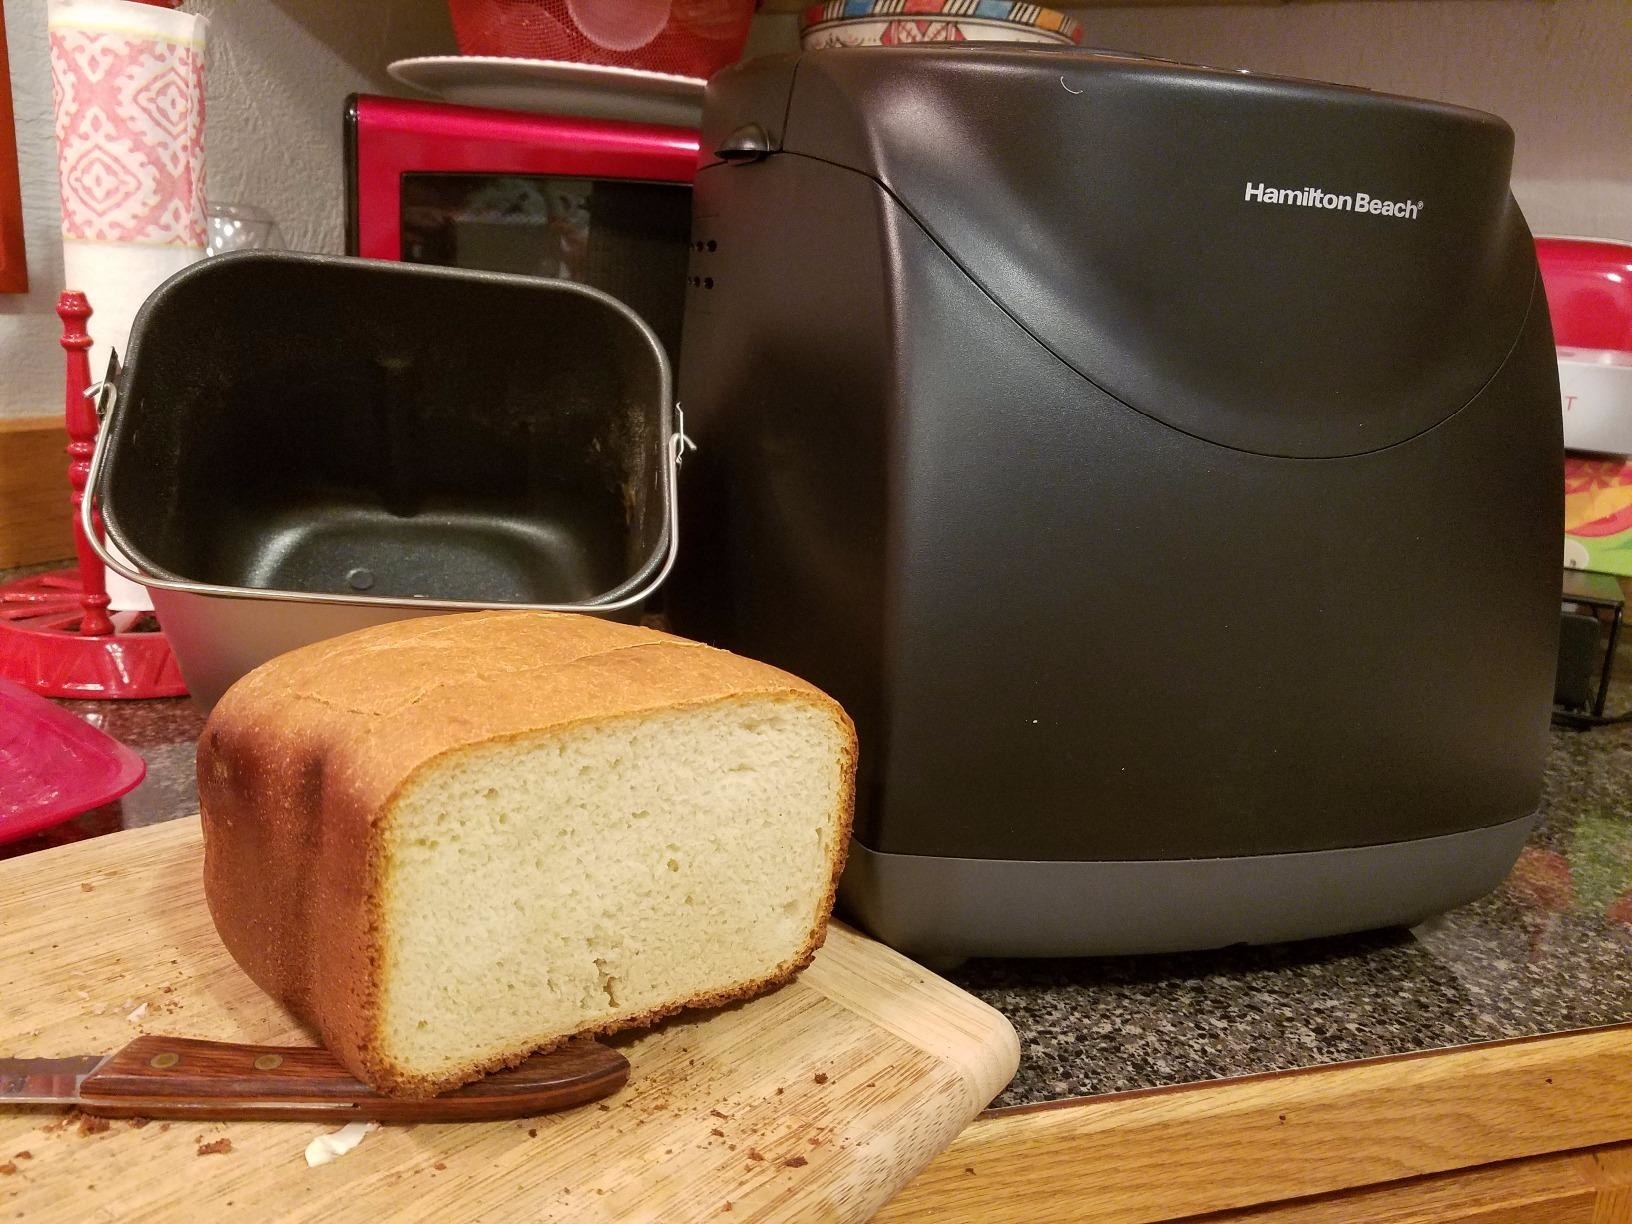 The appliance and some bread it made. which the reviewer cut into so you can see how perfect it is